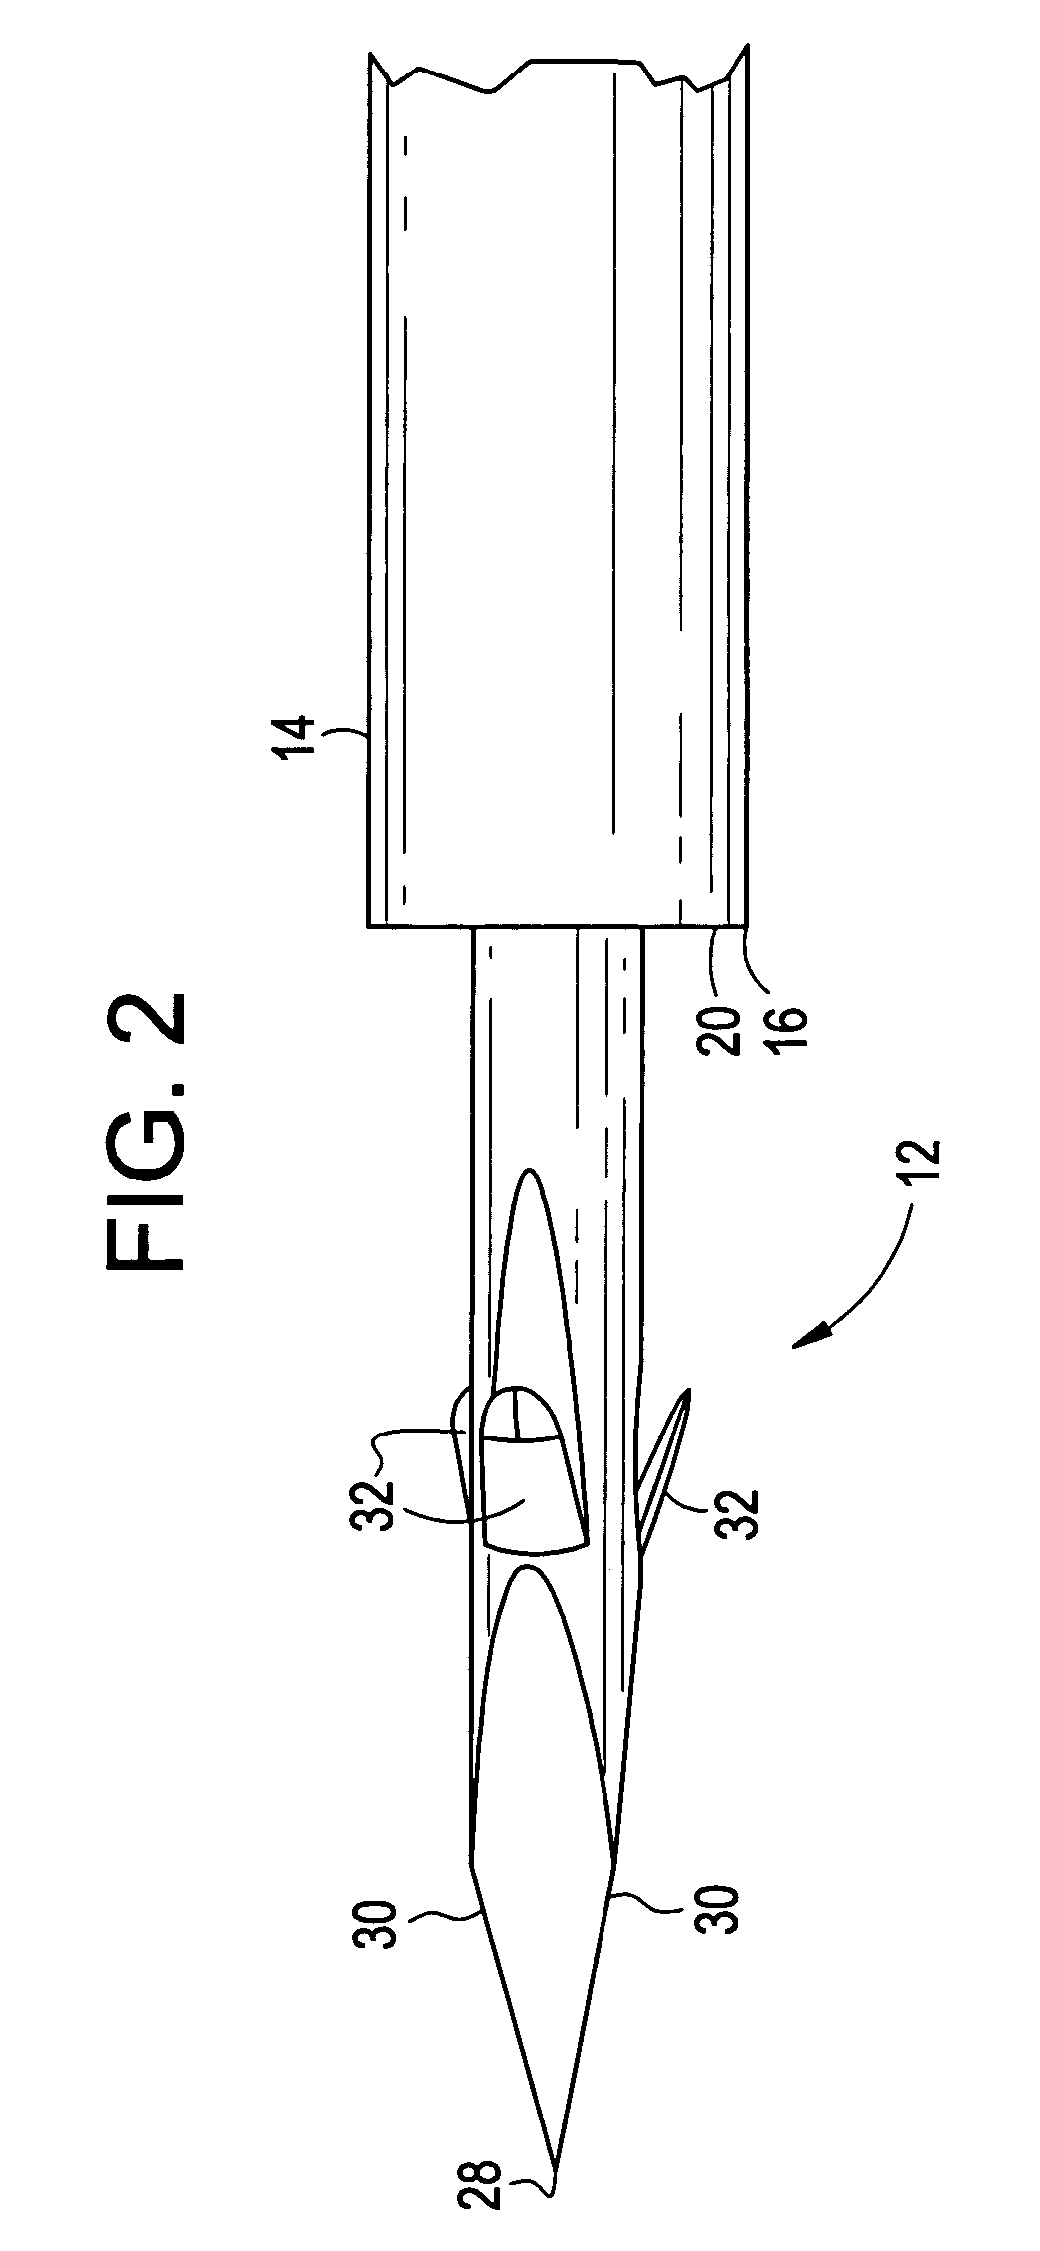 Tissue punch and method for creating an anastomosis for locating a bypass graft